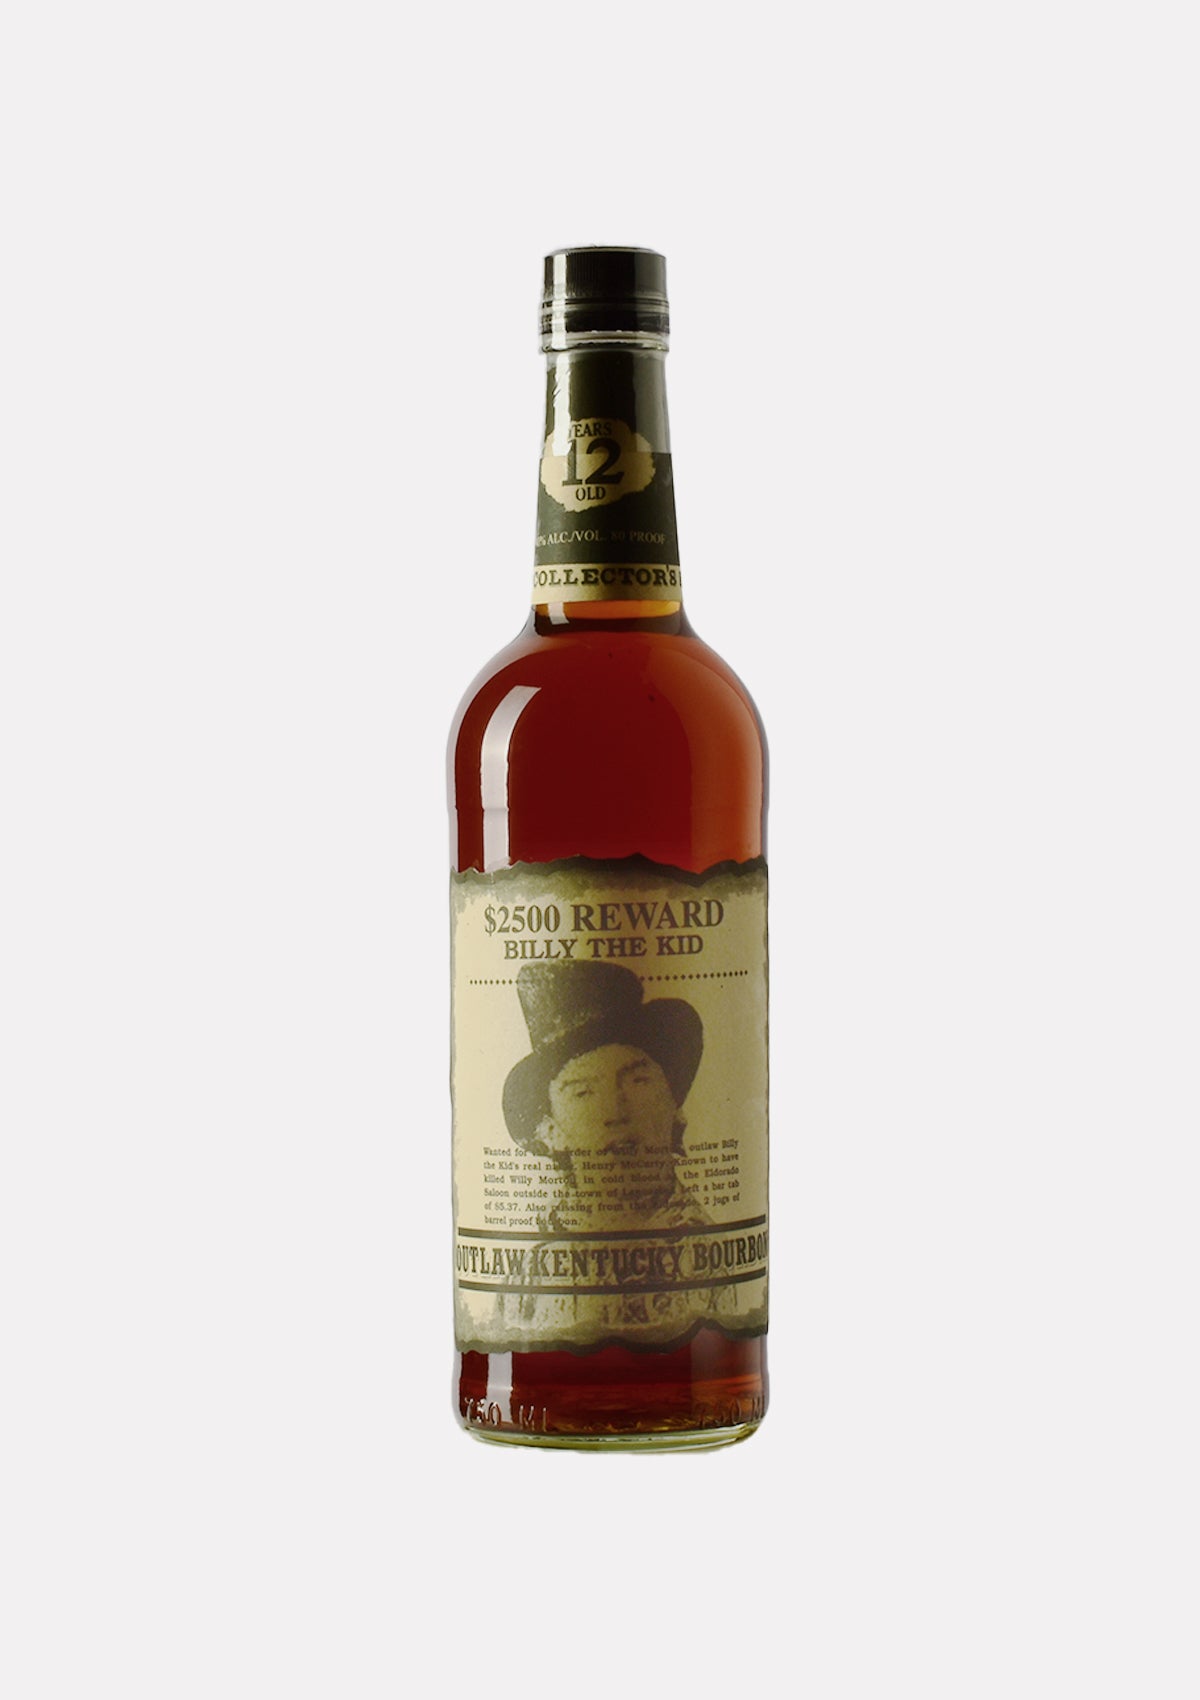 Outlaw Kentucky Bourbon Billy The Kid 12 Jahre